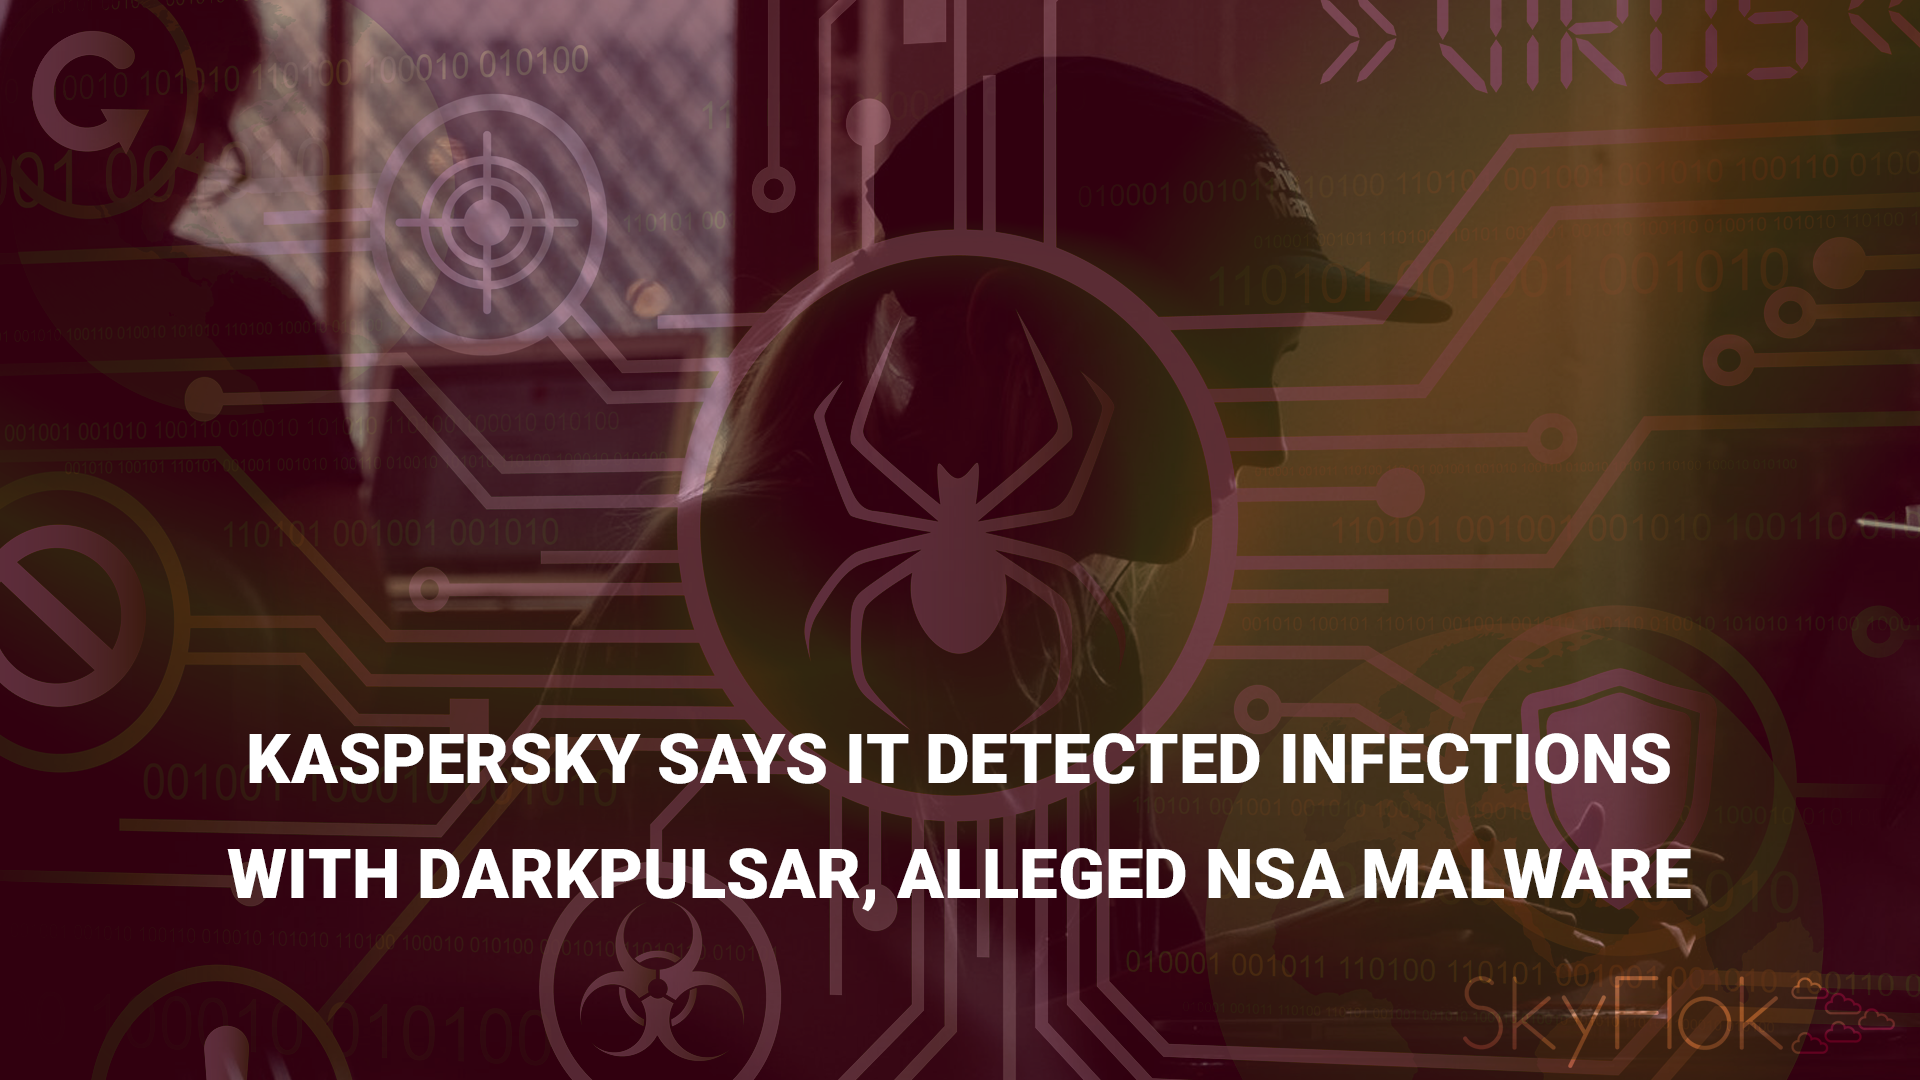 Kaspersky says it detected infections with DarkPulsar, alleged NSA malware